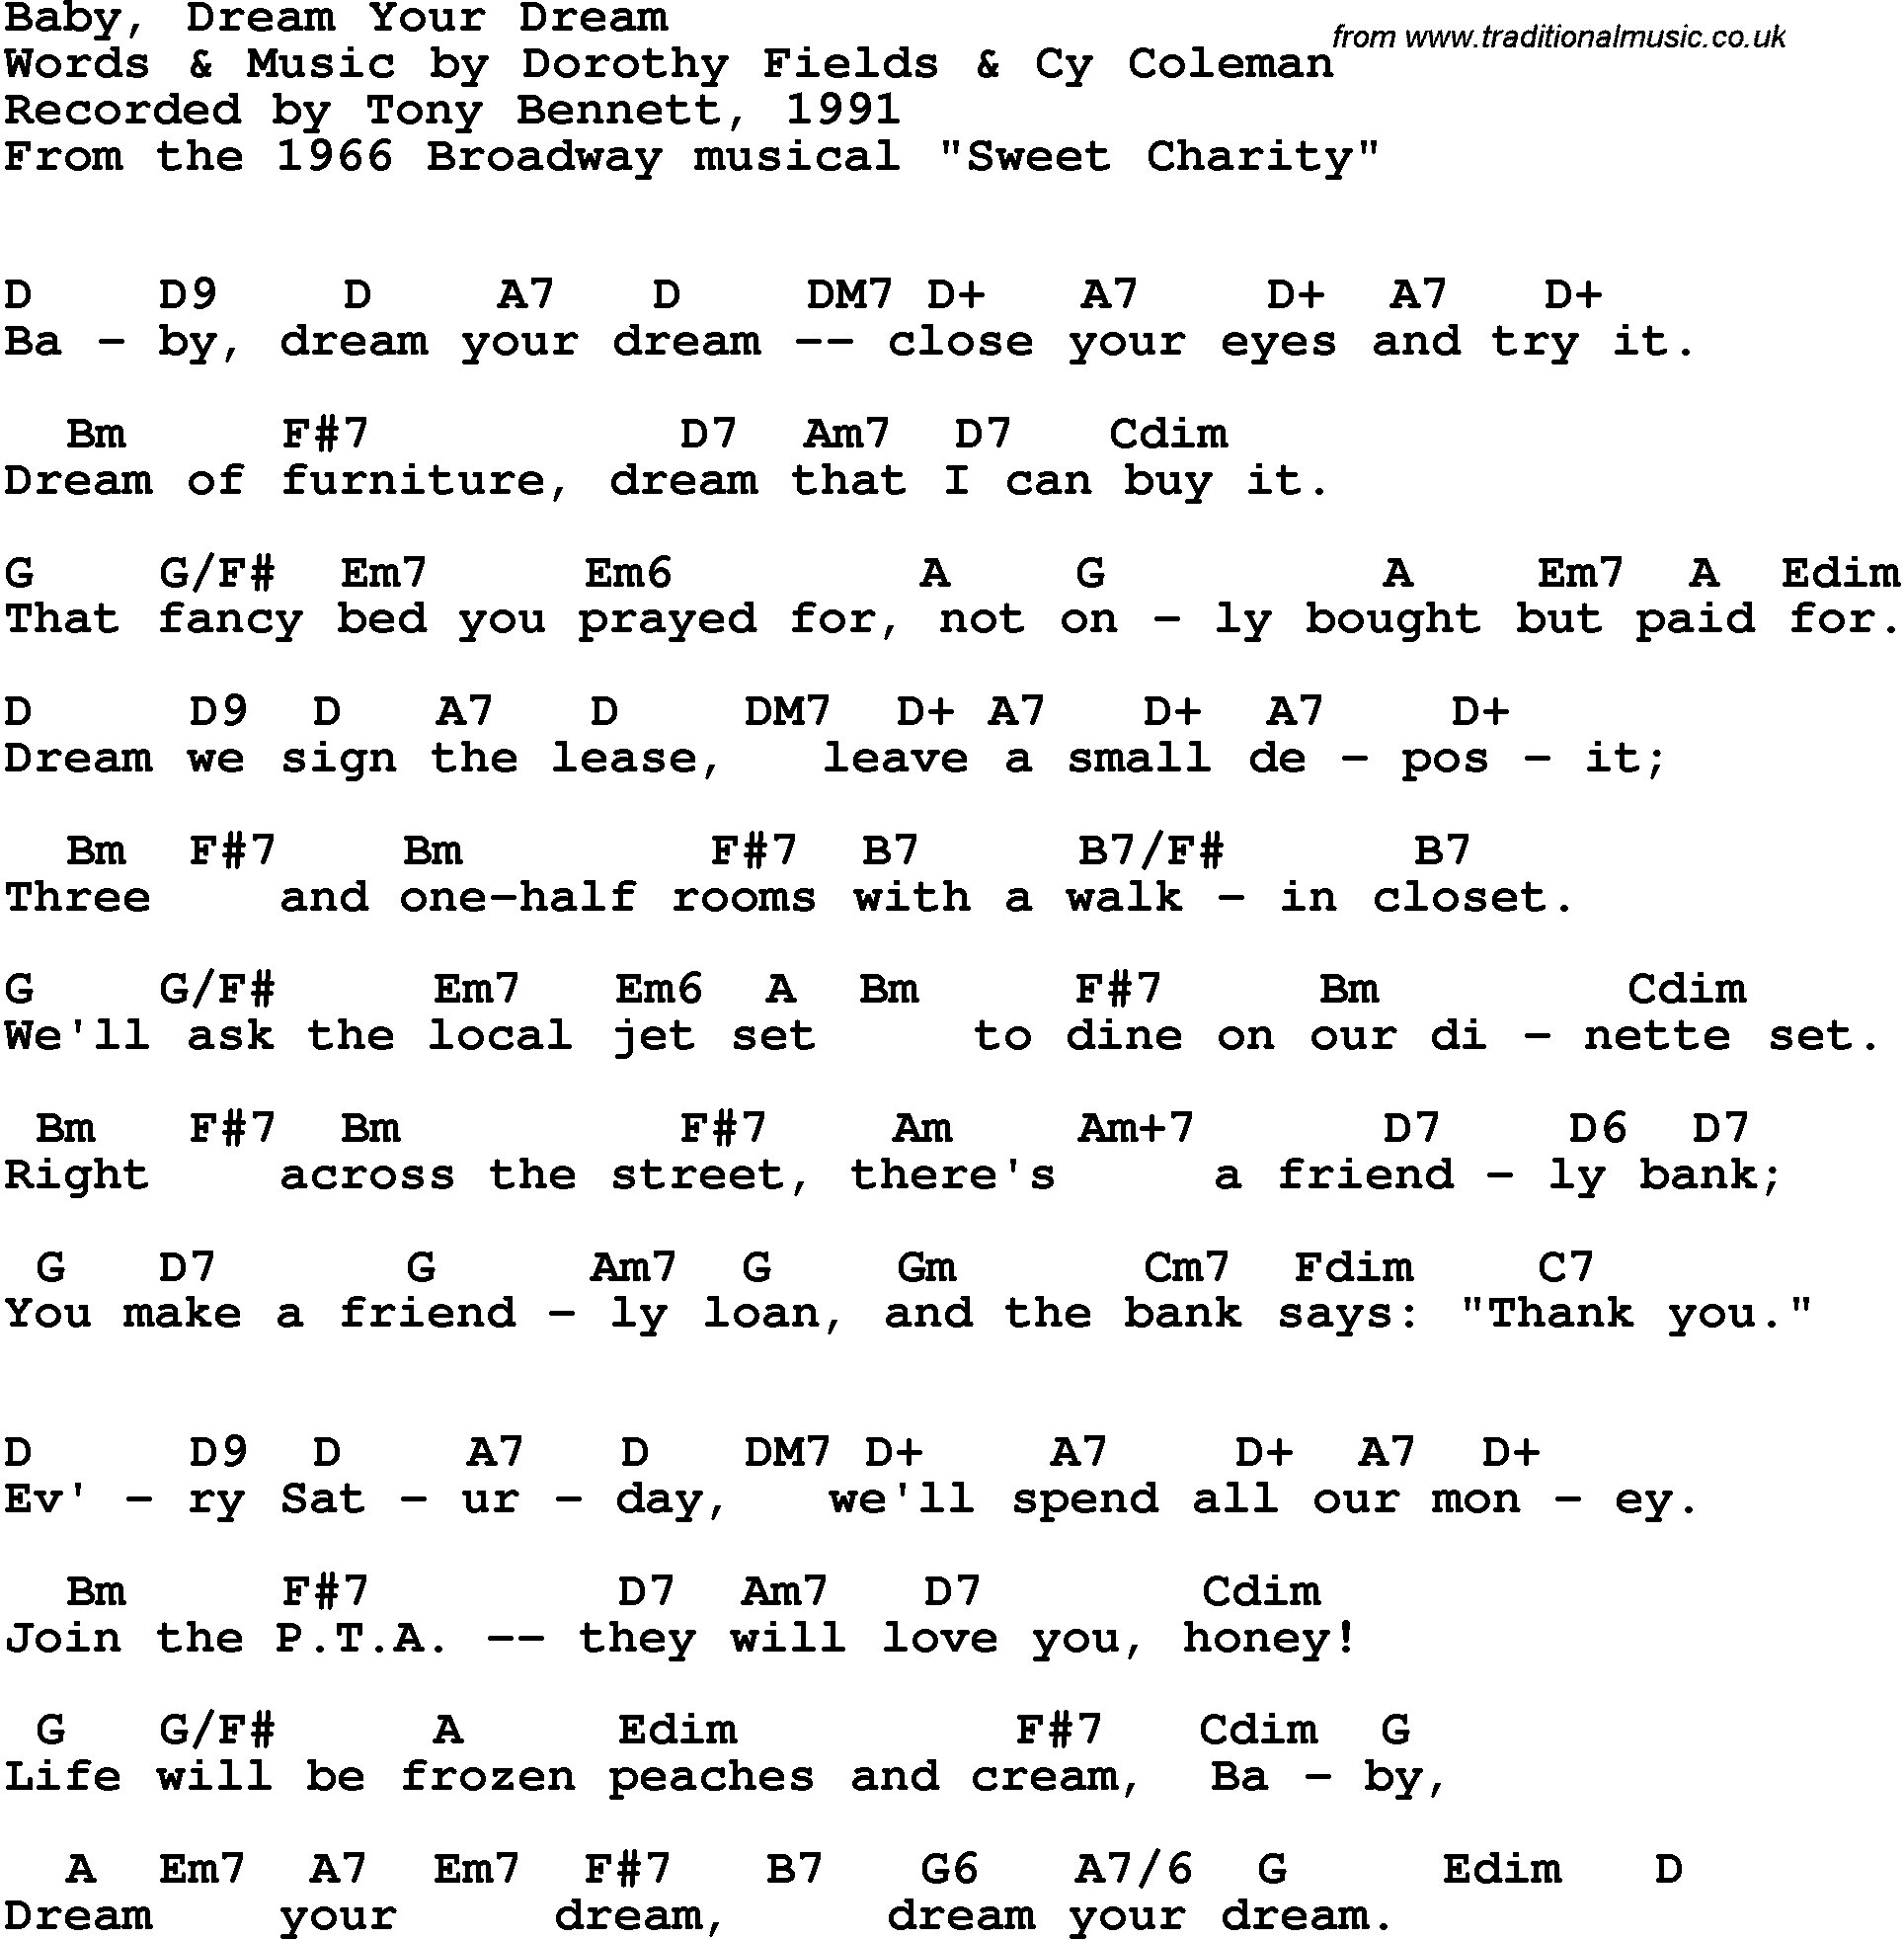 Song Lyrics with guitar chords for Baby Dream Your Dream - Tony Bennett, 1991